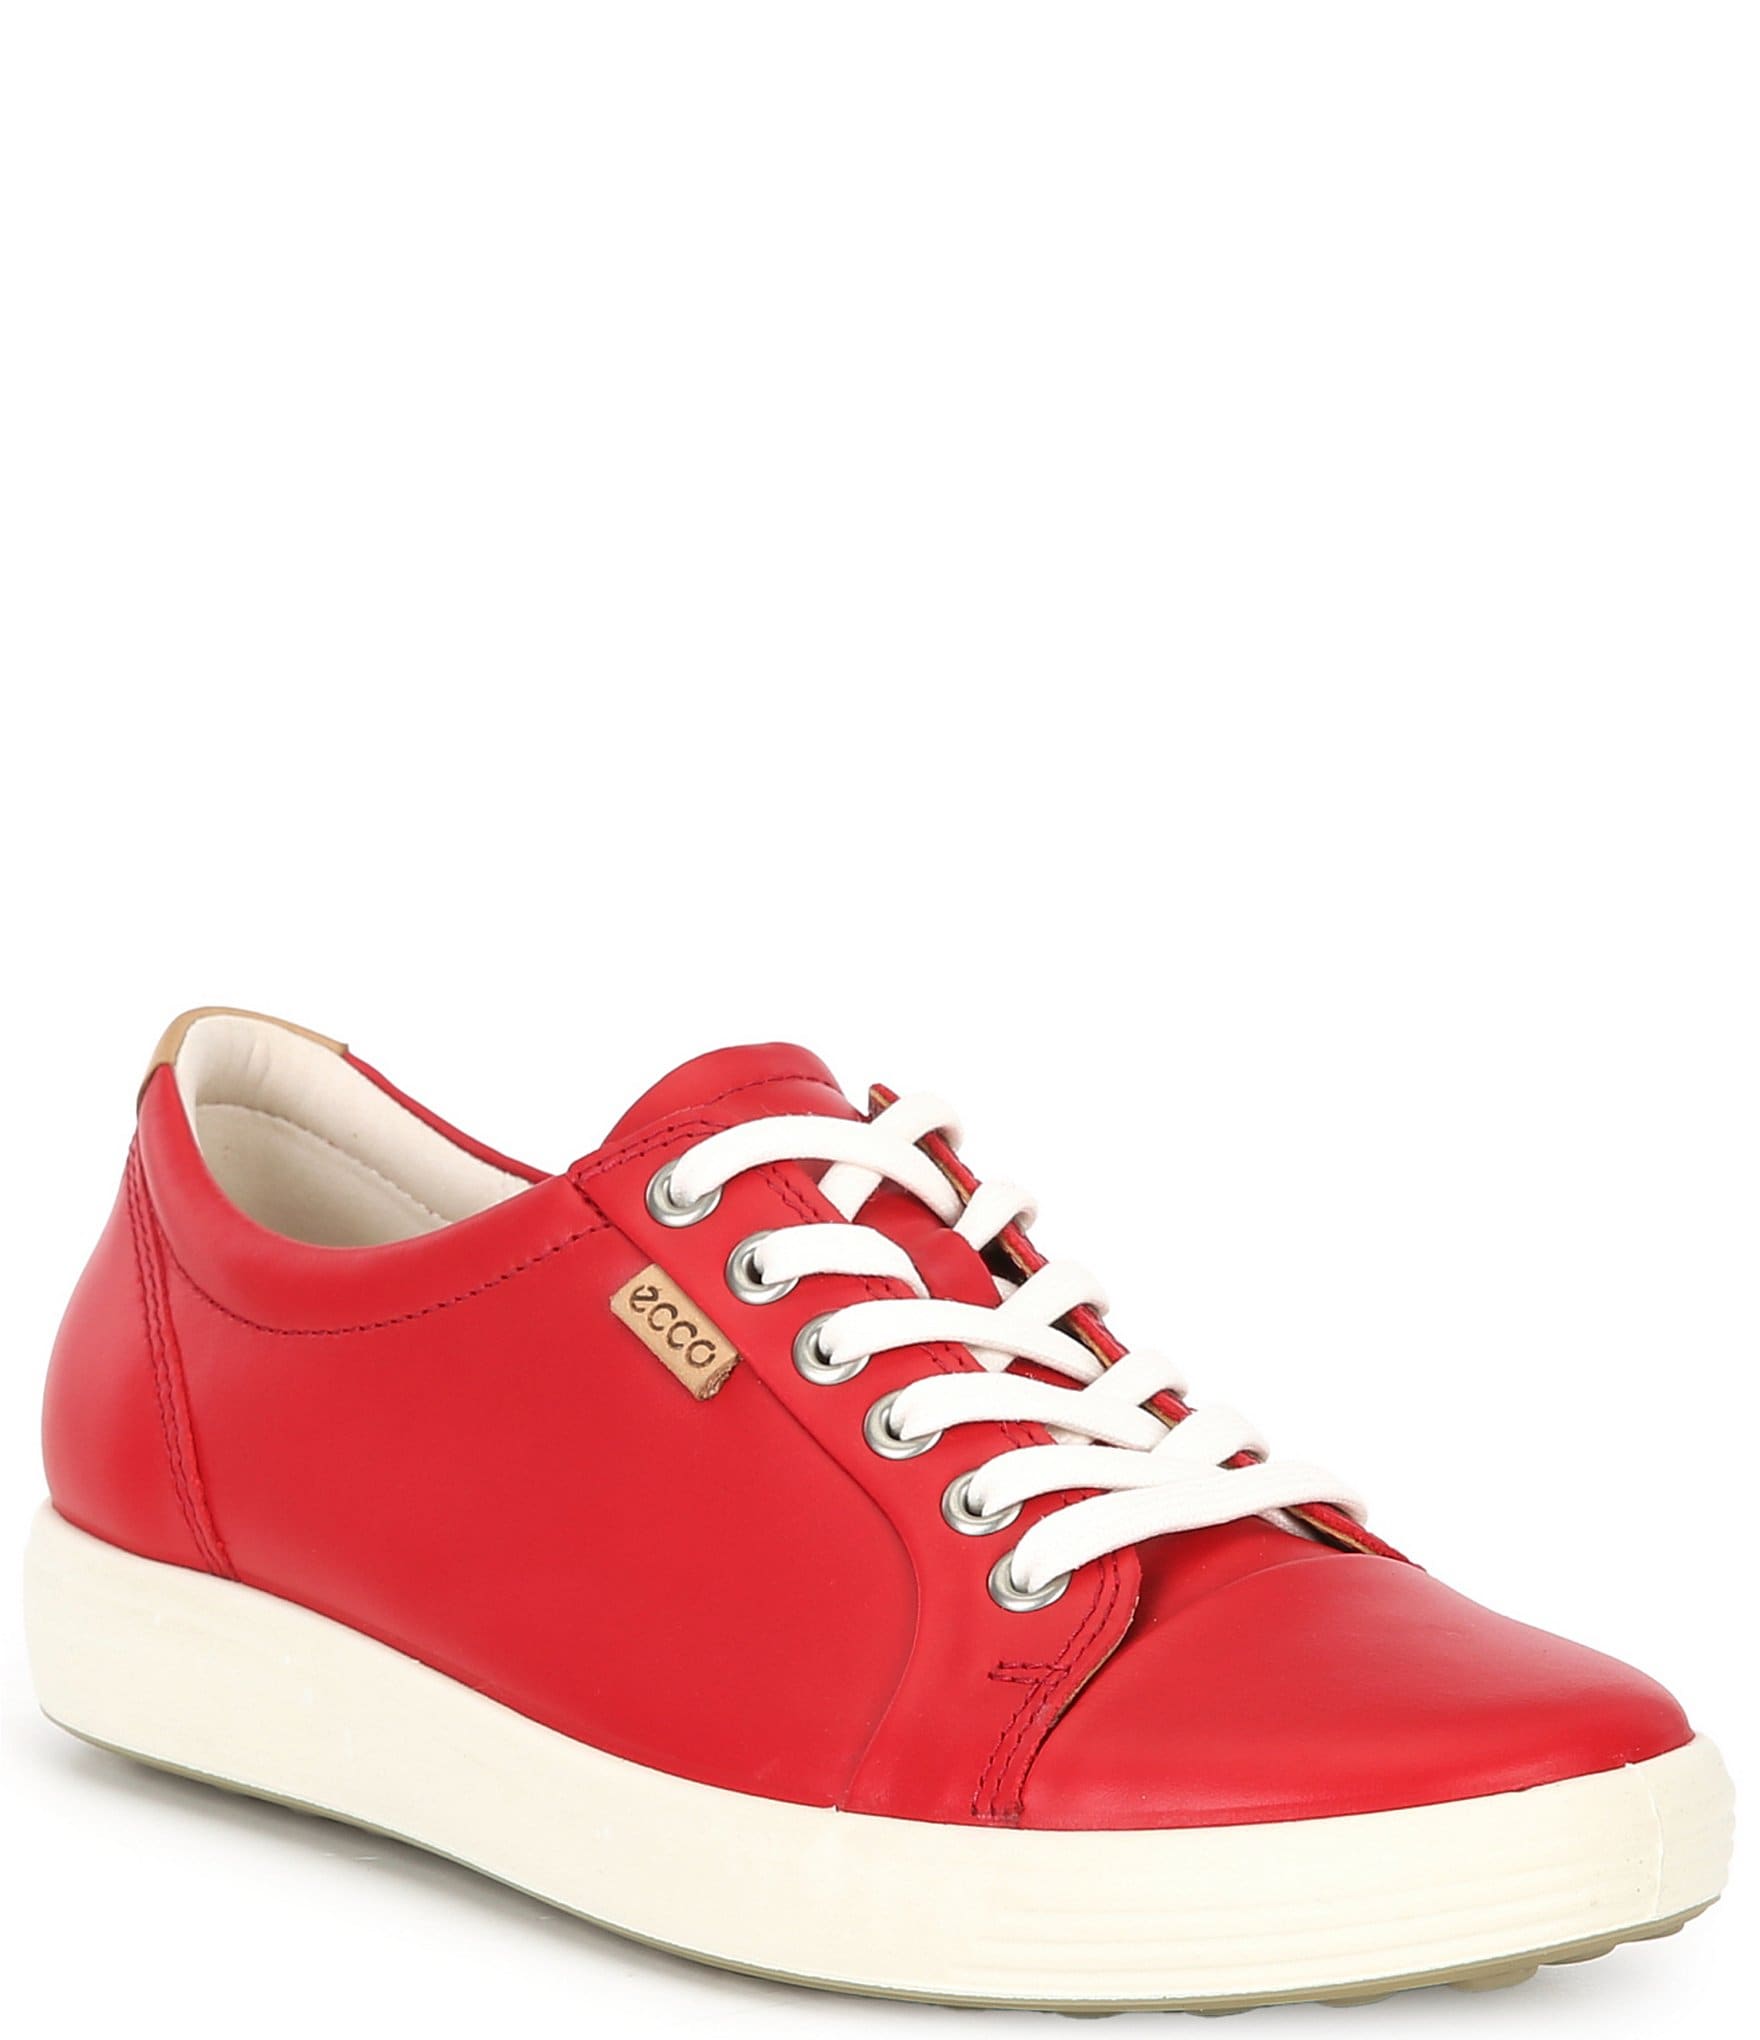 https://www.dillards.com/p/ecco-soft-vii-leather-lace-up-sneakers/505327266